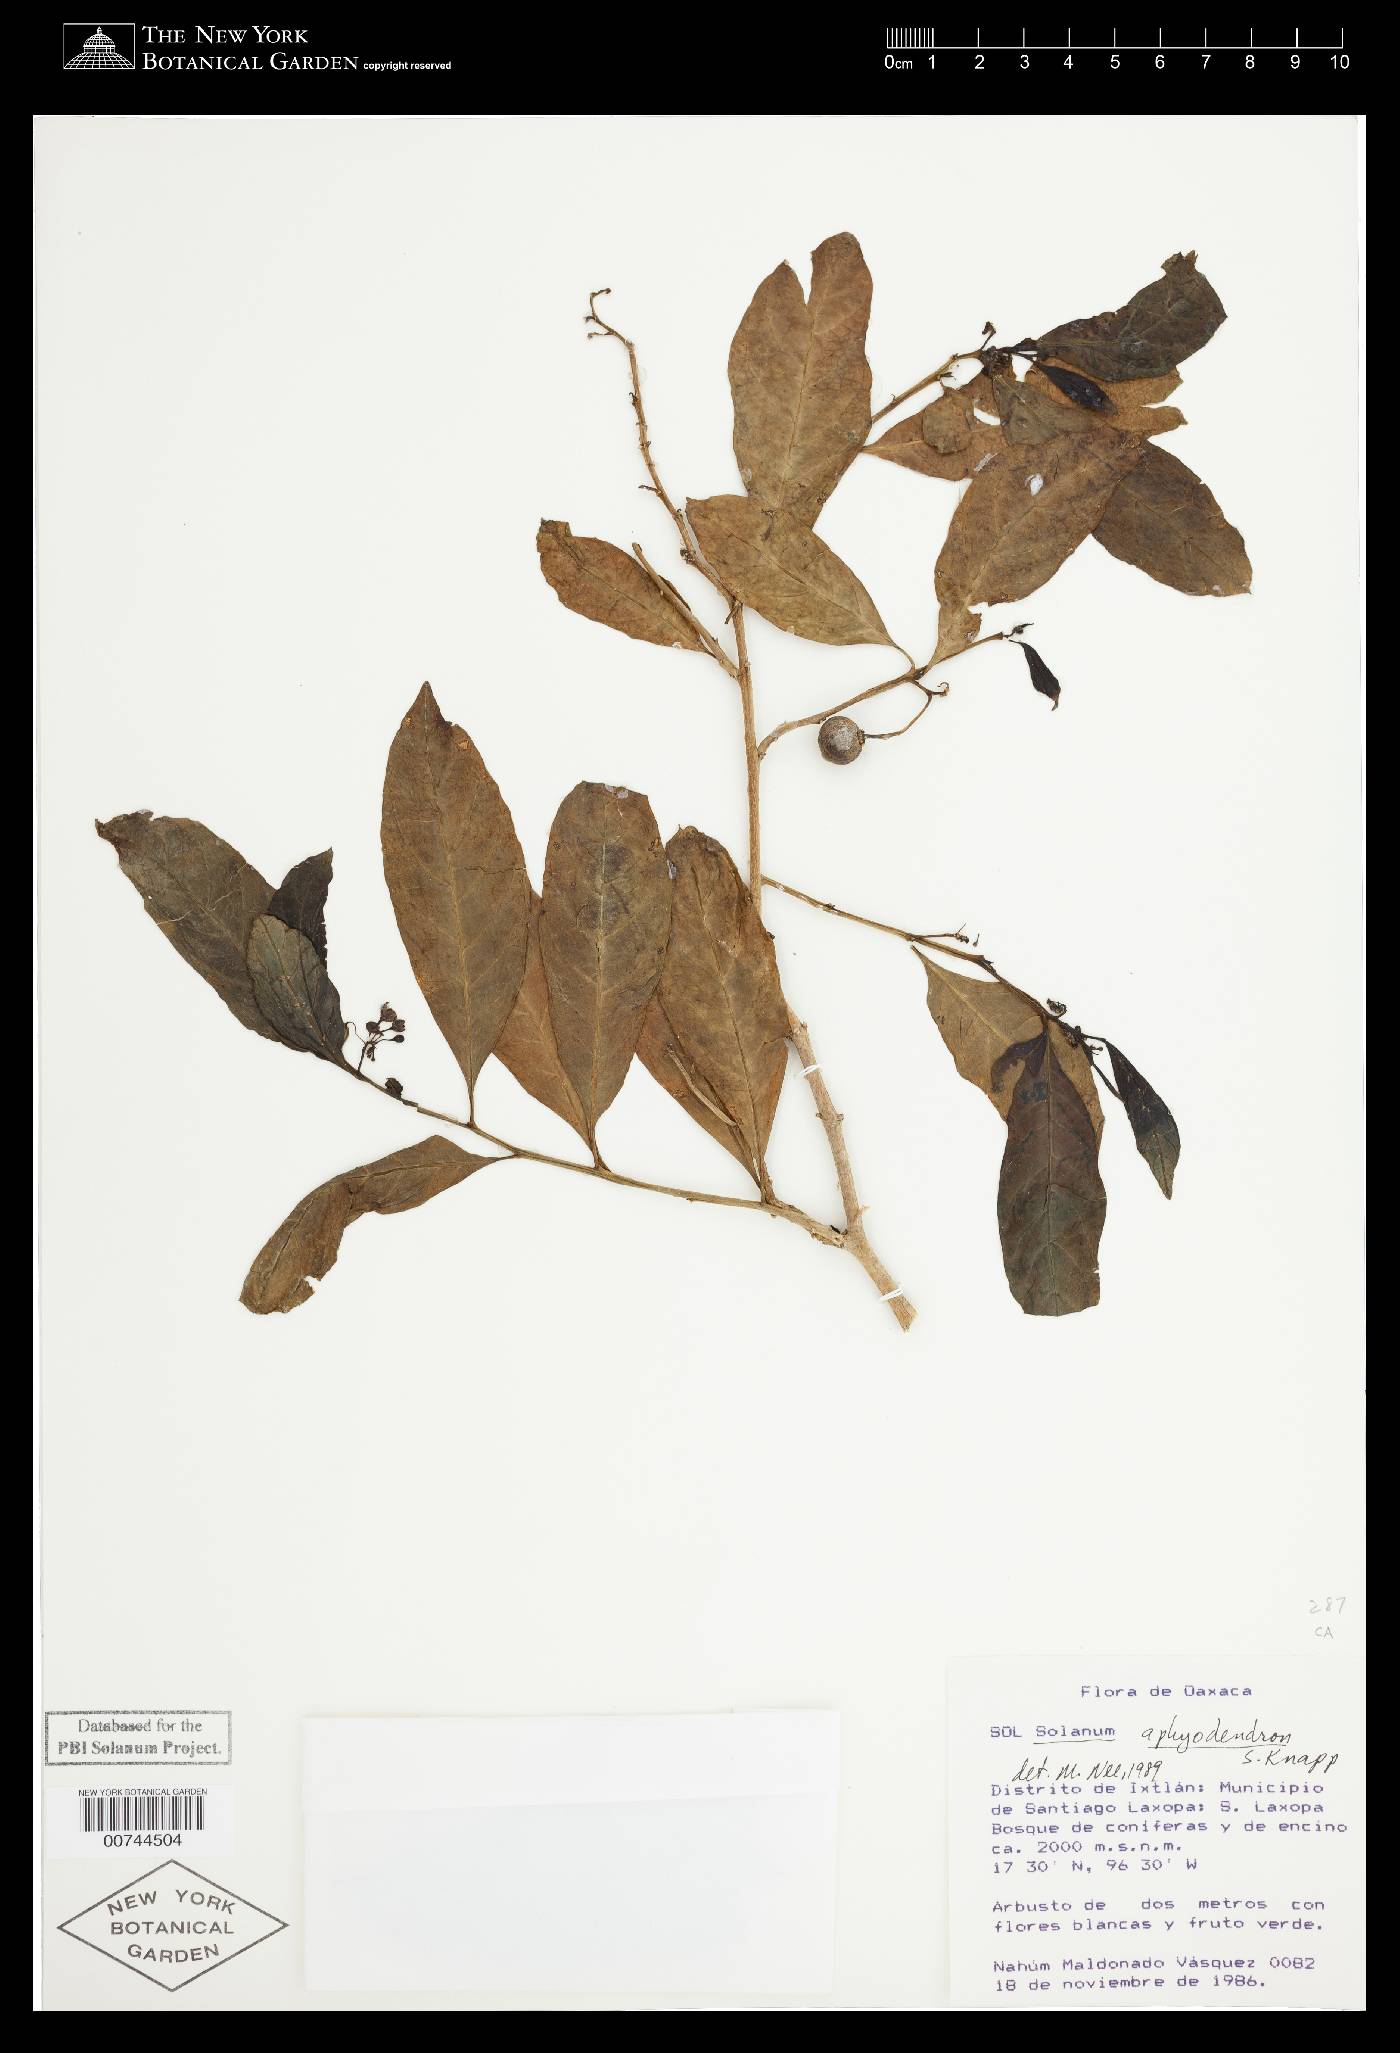 Solanum aphyodendron image